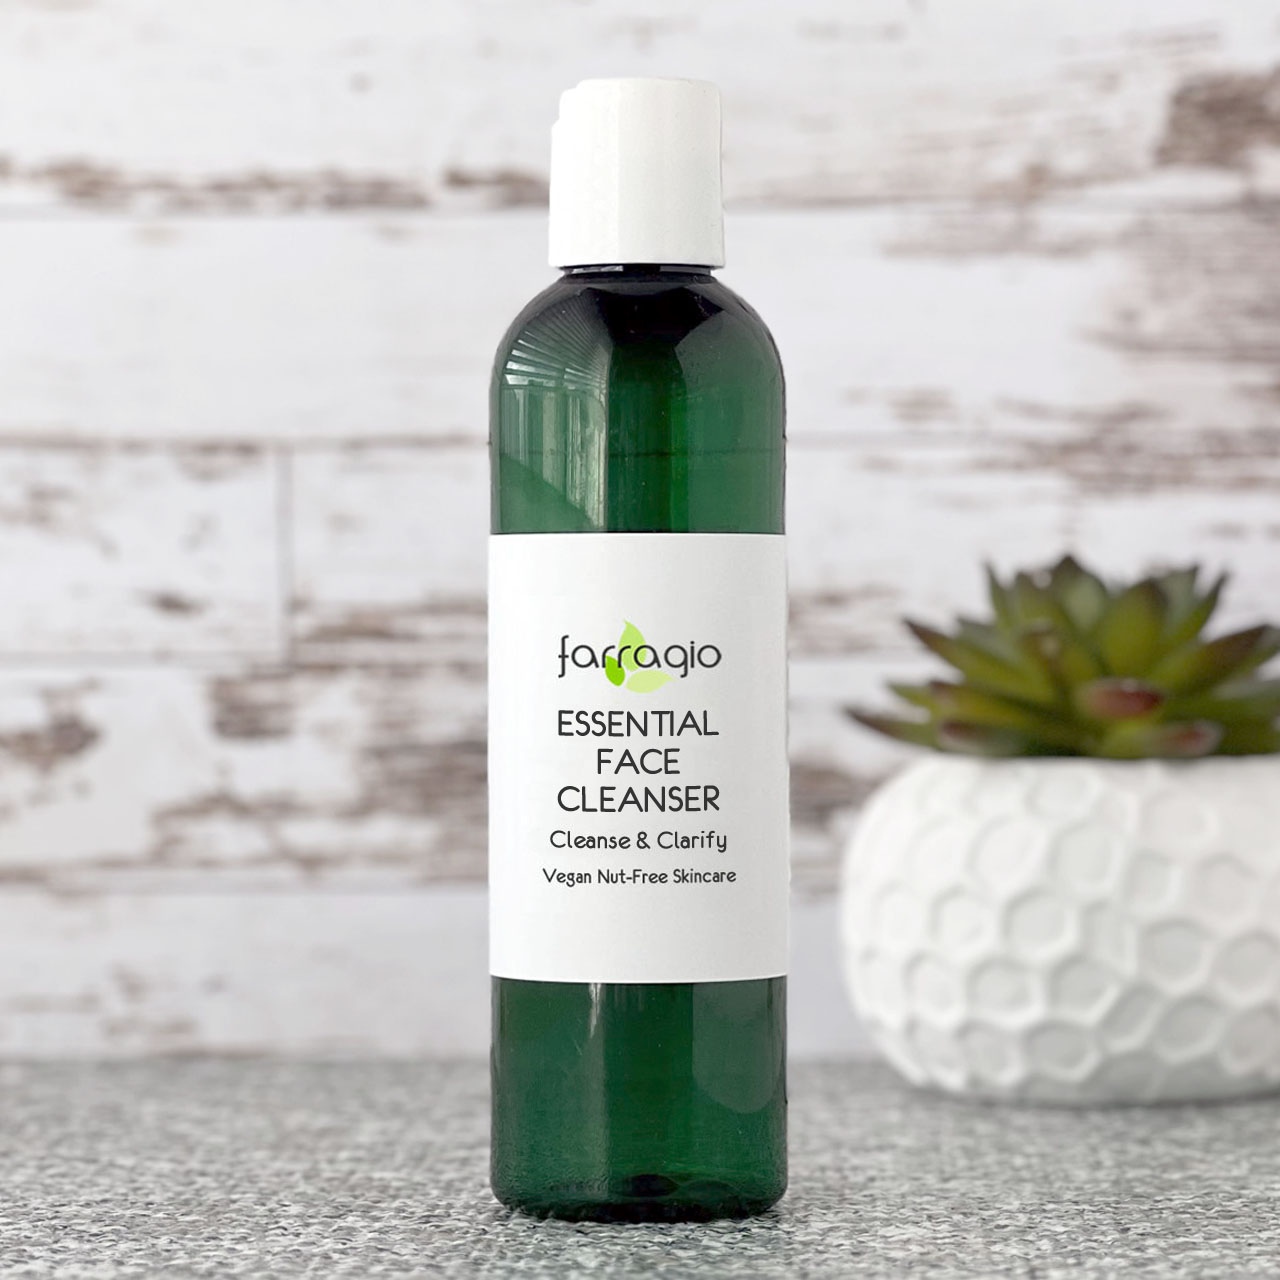 green bpa-free plastic bottle of natural face cleanser